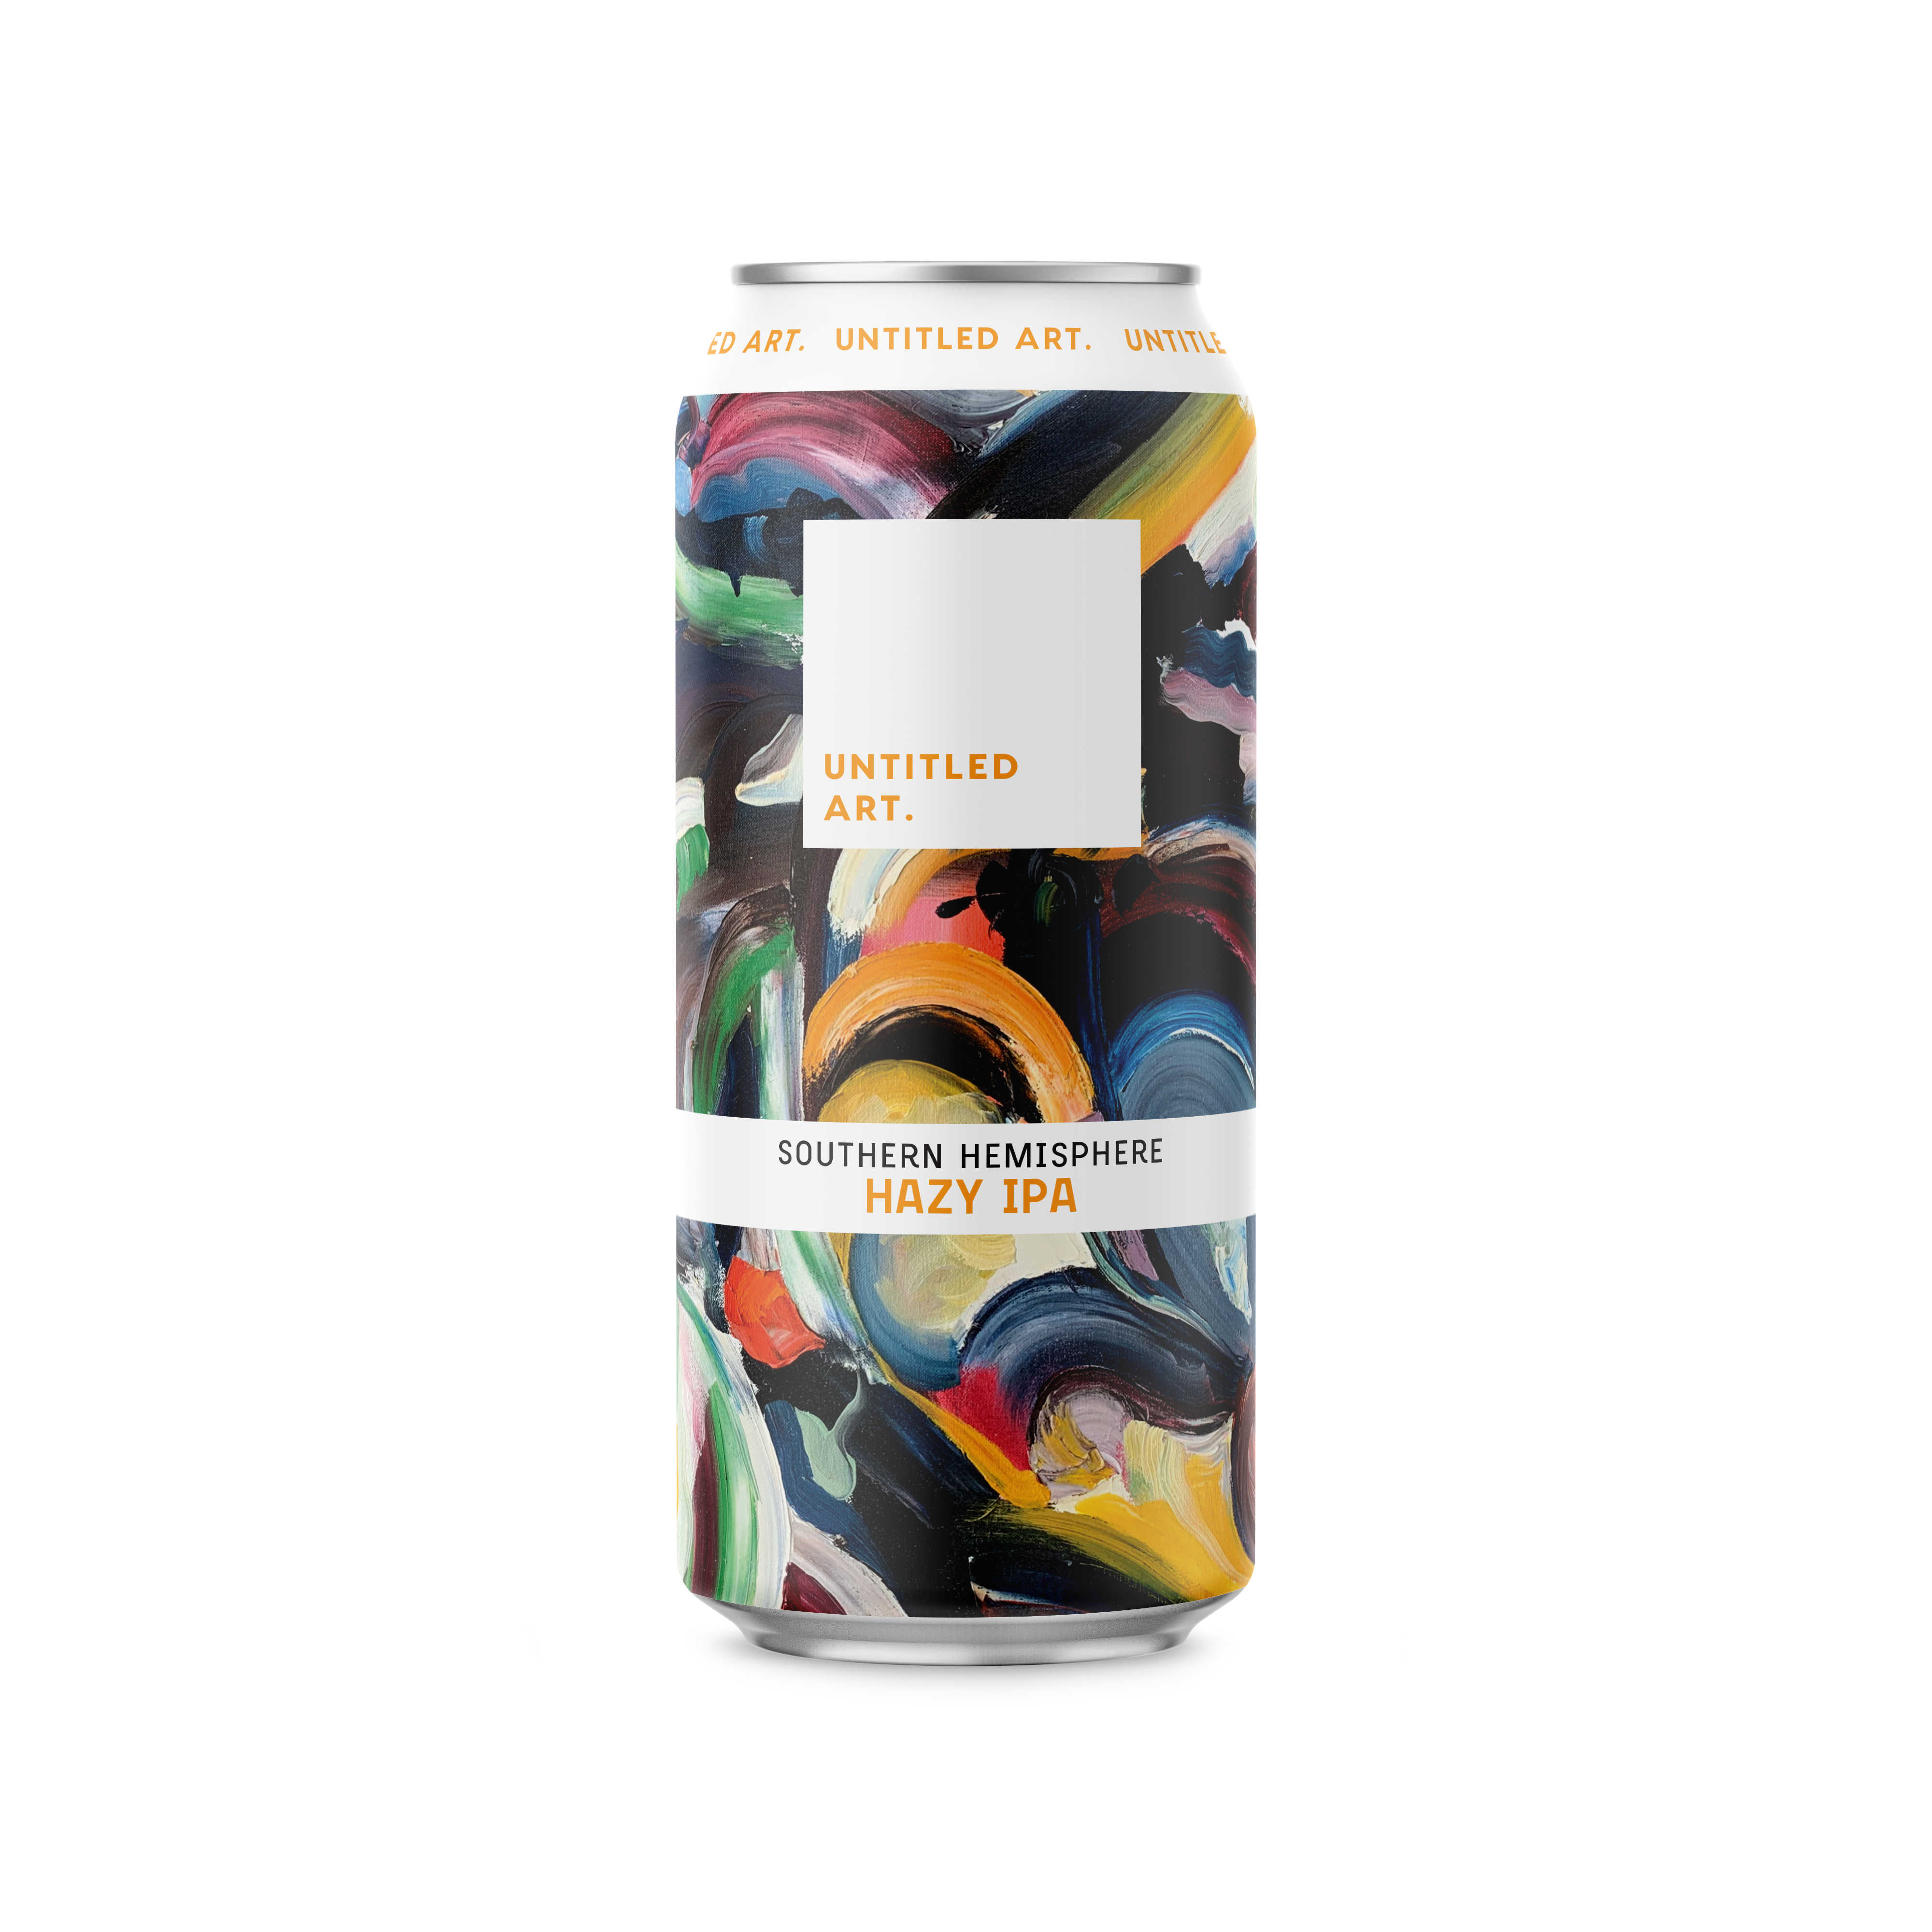 A can with an orange and white swirl on it.